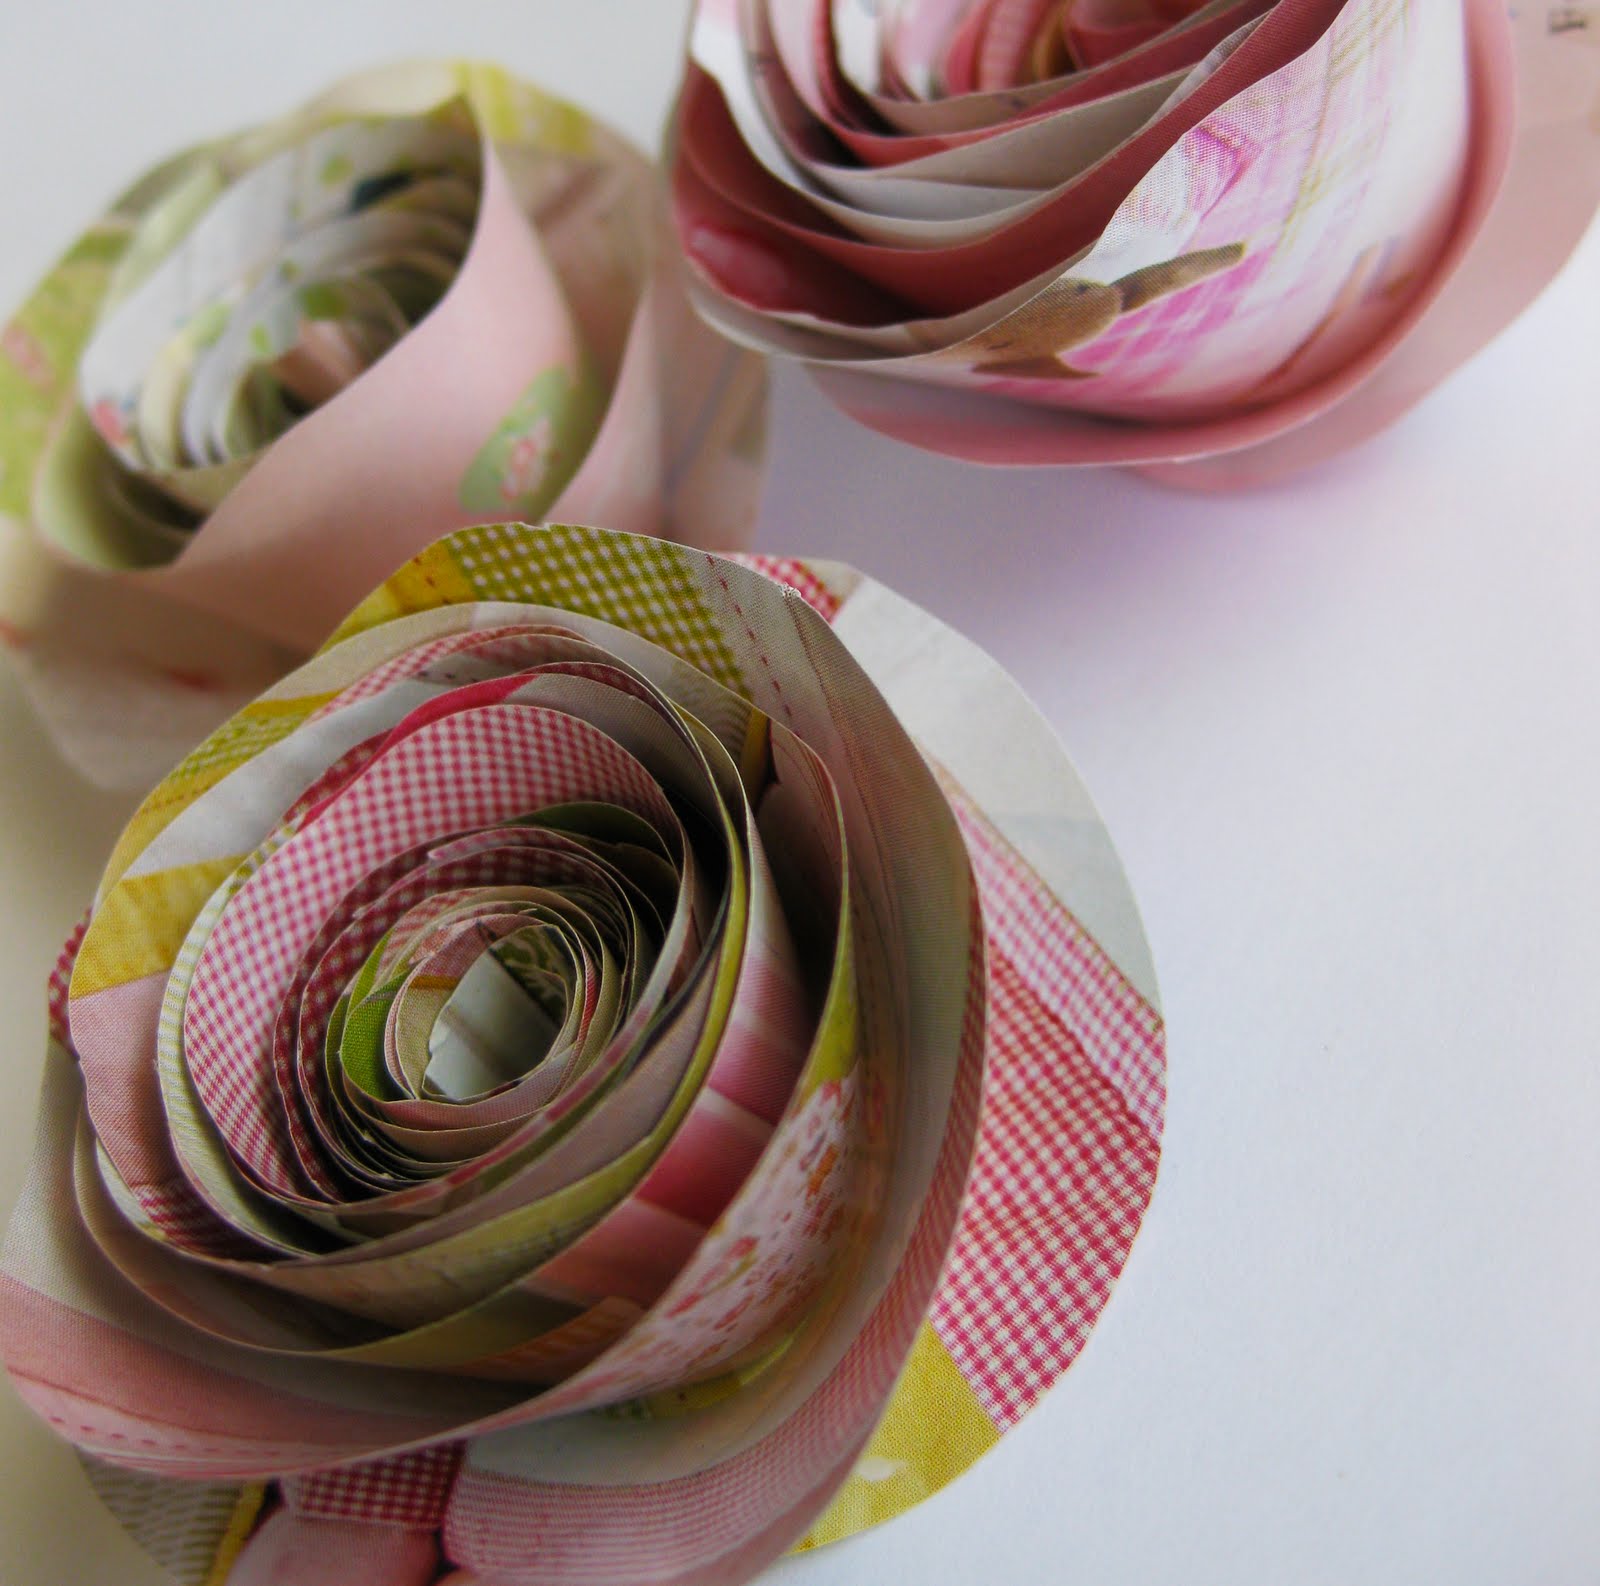 frugal-life-project-cute-rolled-paper-flowers-made-from-magazine-pages